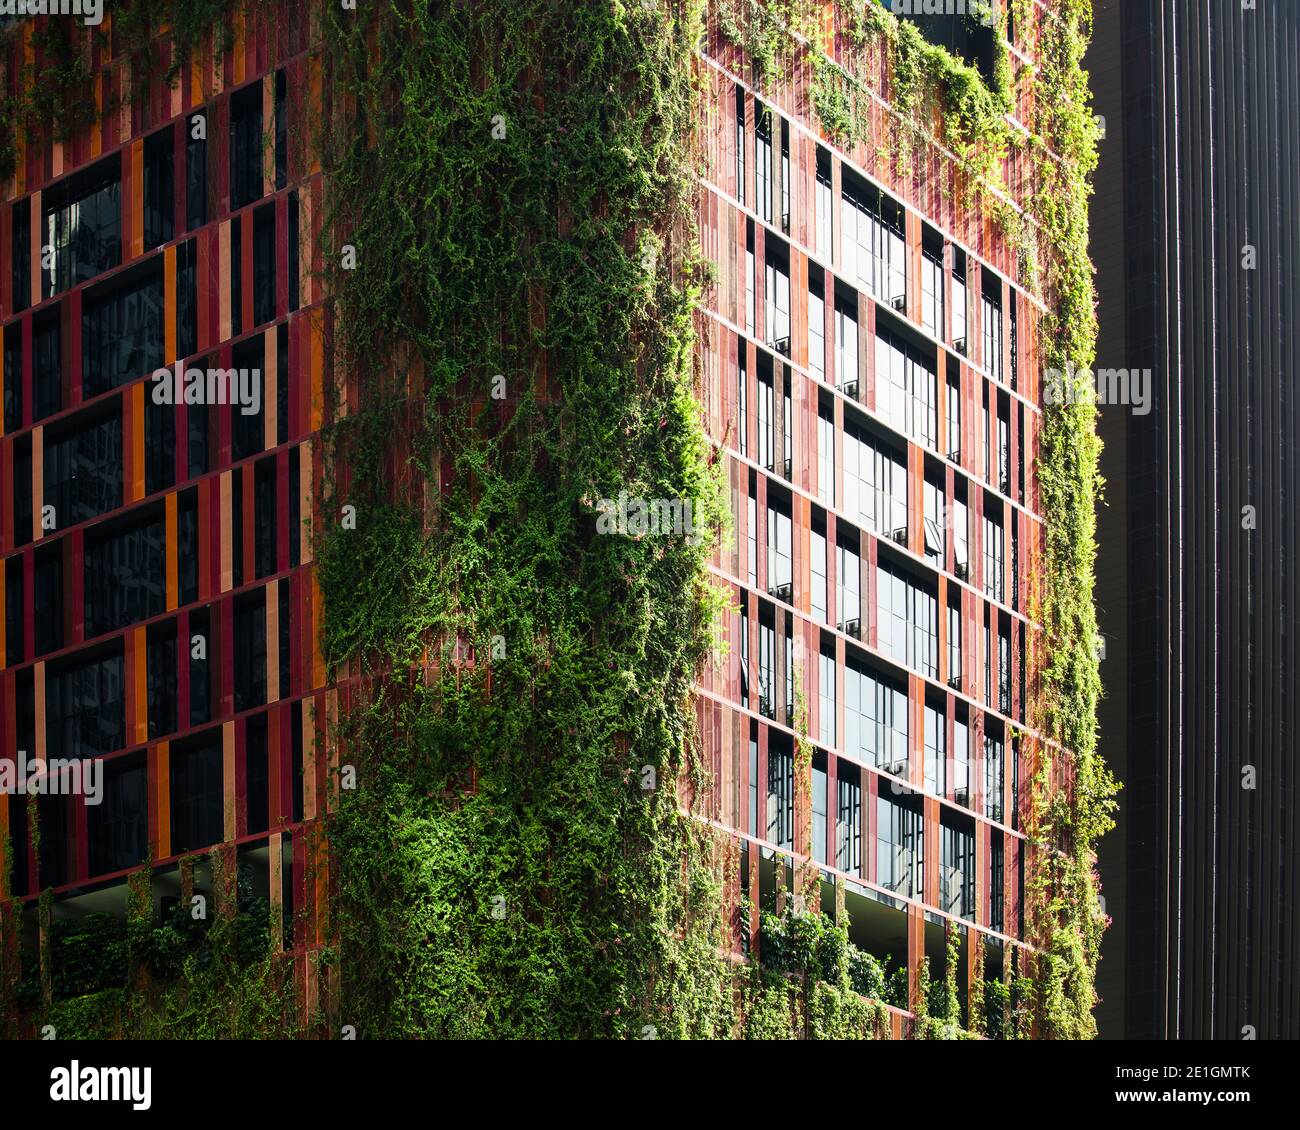 Exterior view of the green facade of the Oasia Hotel Downtown in Singapore's CBD. Stock Photo